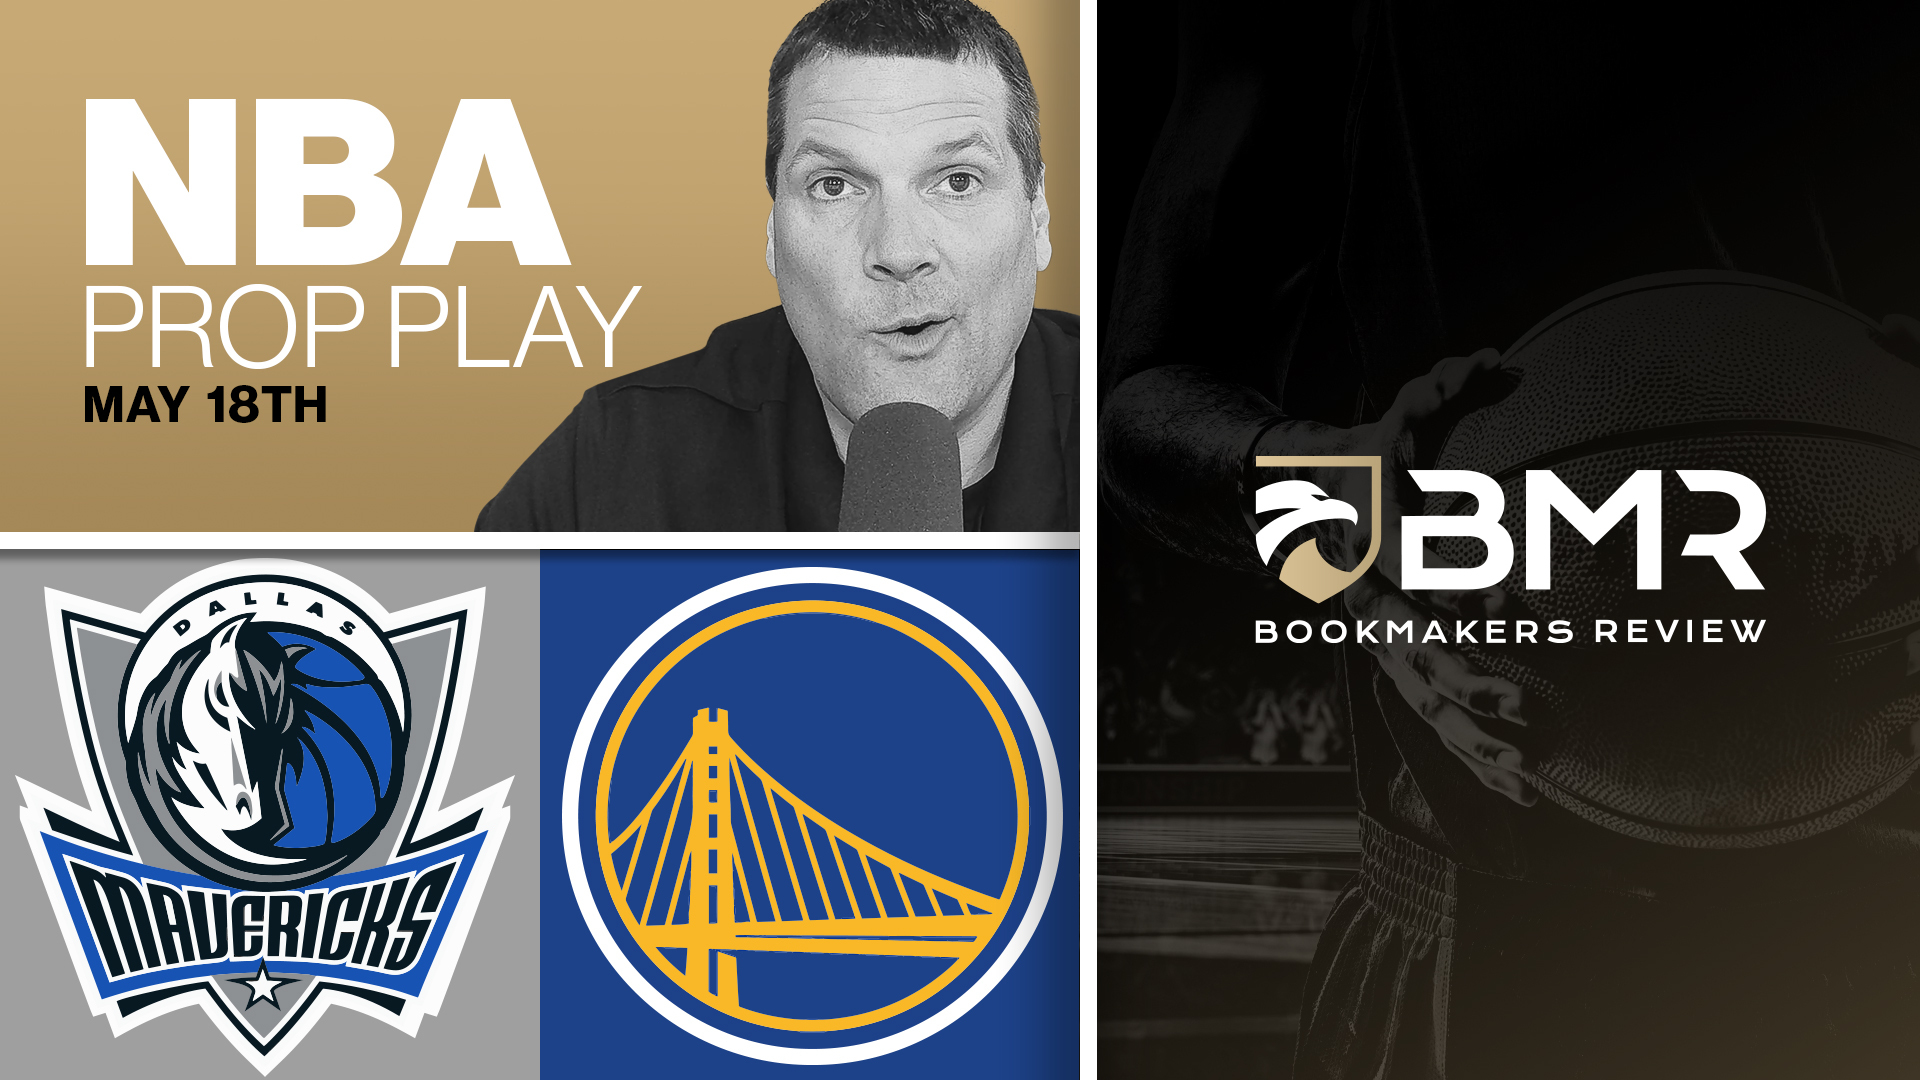 Mavericks vs. Warriors | Free NBA Playoffs Player Prop Pick by Donnie RightSide &#8211; May 18th